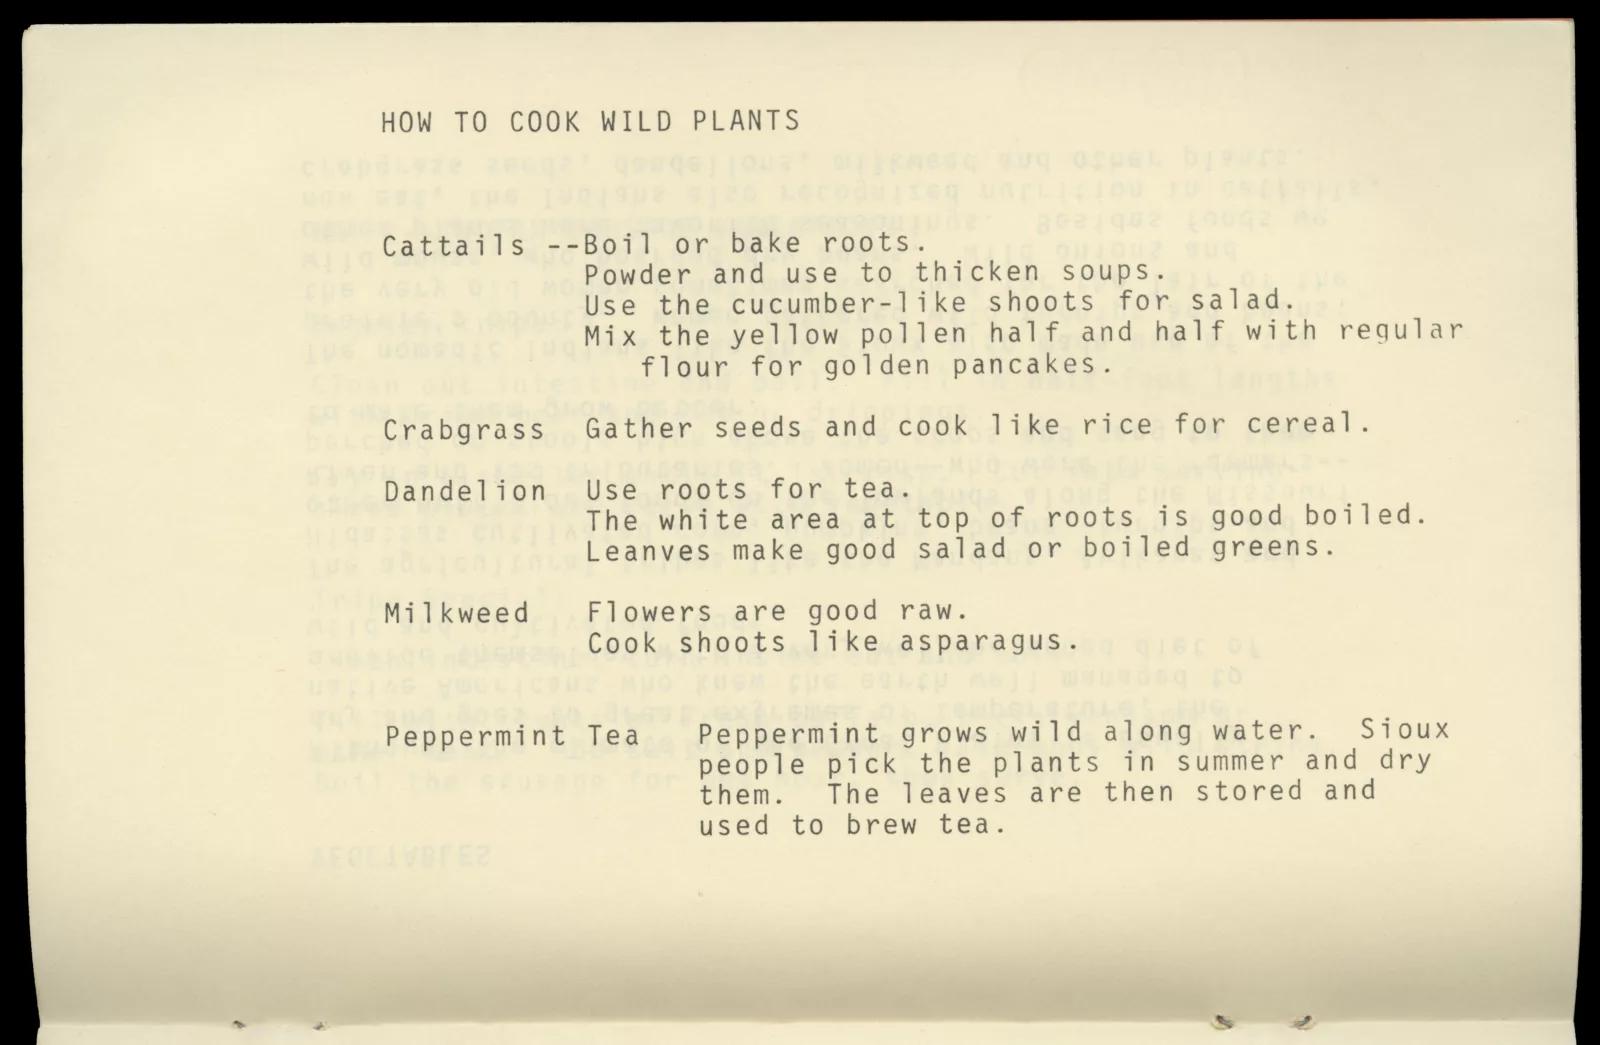 Typed text that reads: "How to cook wild plants. Cattails--boil or bake roots. Powder and use to thicken soups. Use the cucumber-like shoots for salad. Mix the yellow pollen half and half with regular flour for golden pancakes. Crabgrass--gather seeds and cook like rice for cereal. Dandelion--use roots for tea. The white area at top of roots is good boiled. Leaves make good salad or boiled greens. Milkweed--Flowers are good raw. Cook shoots like asparagus. Peppermint tea--peppermint grows wild along water. Sioux people pick the plants in summer and dry them. The leaves are then stored and used to brew tea."